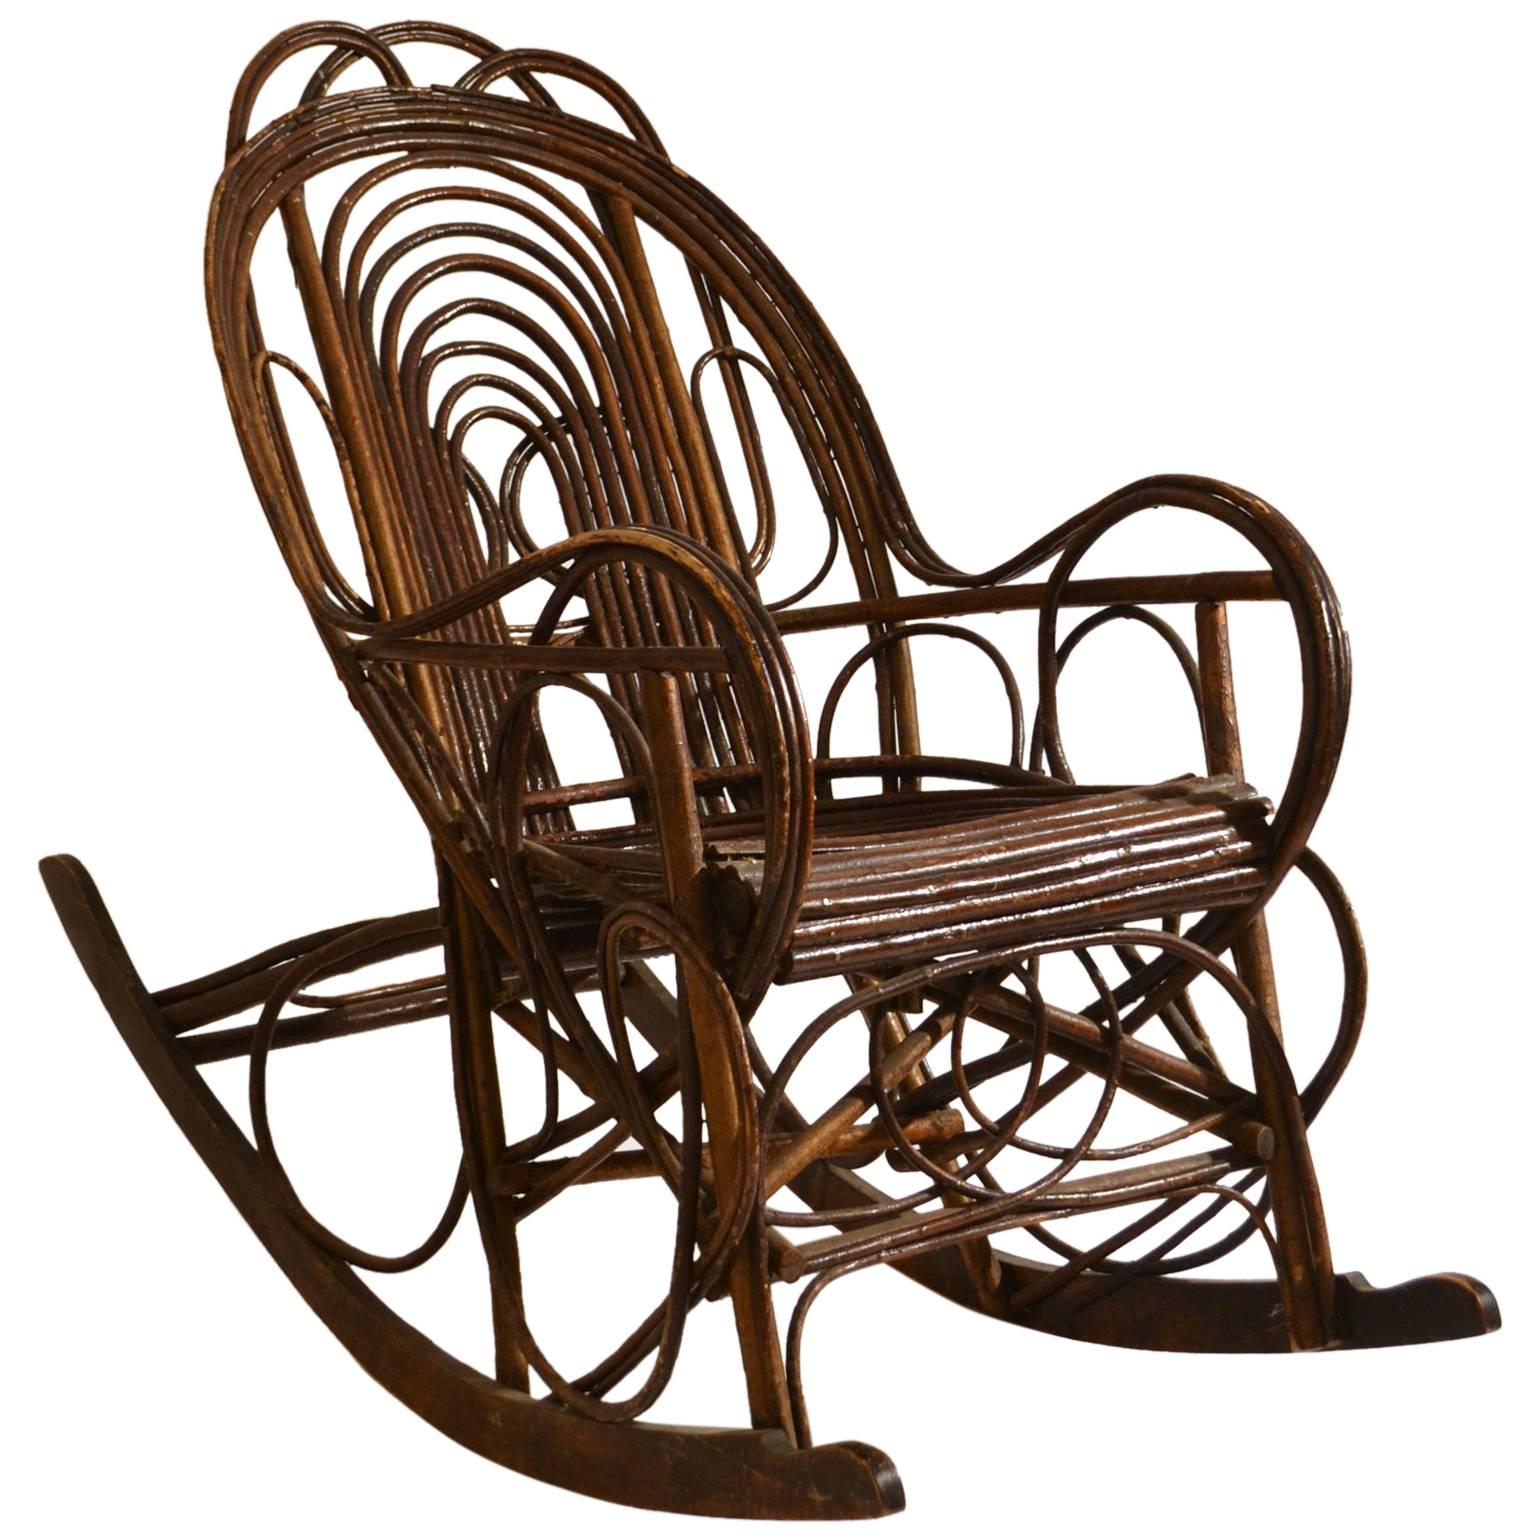 Early 20th Century Swedish Rocking Chair in Bent Wood Willow